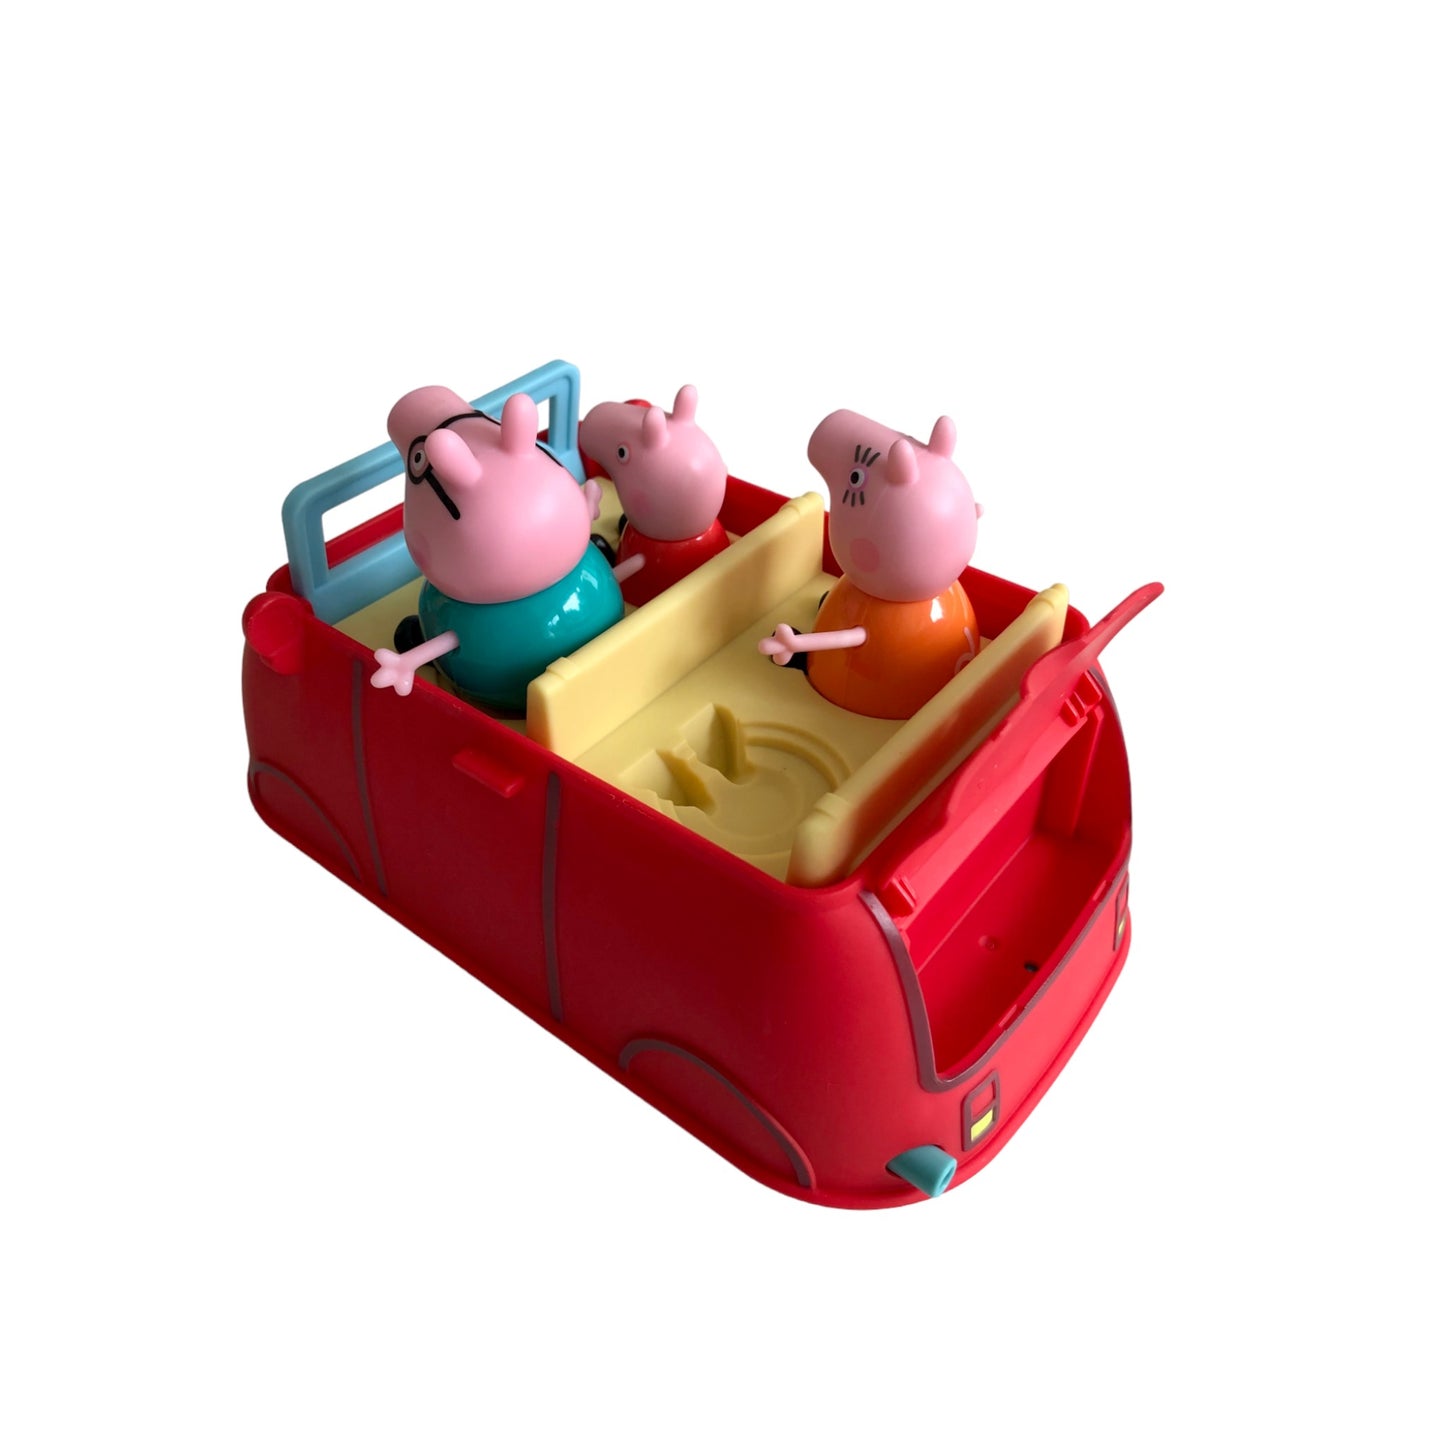 Peppa Pig - The red family car (3 characters included)